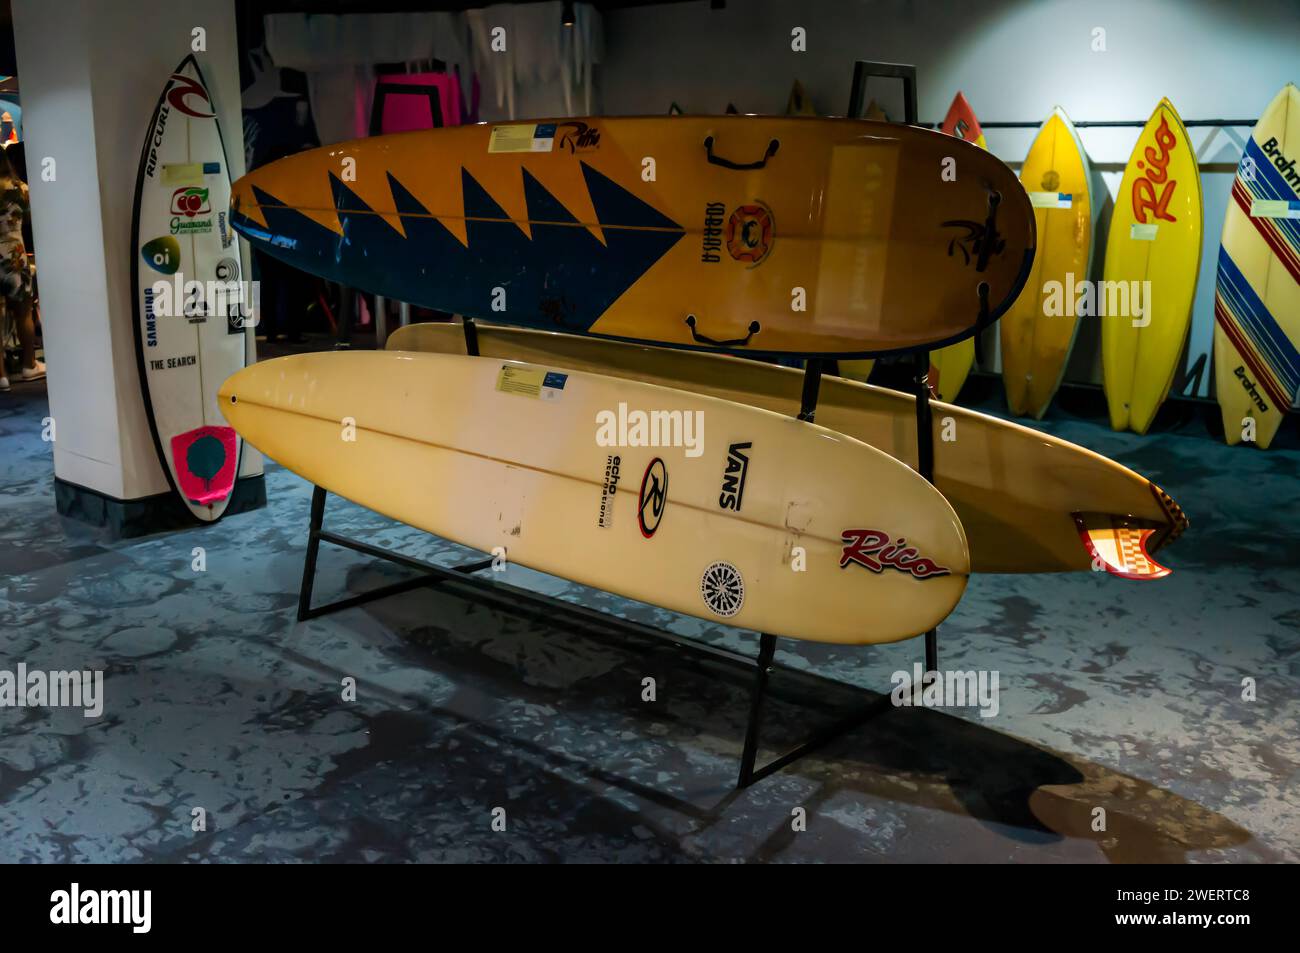 A collection of colorful surfboards on a rack, part of Rico Surf museum exhibition displayed inside AquaRio public marine aquarium in Gamboa district. Stock Photo